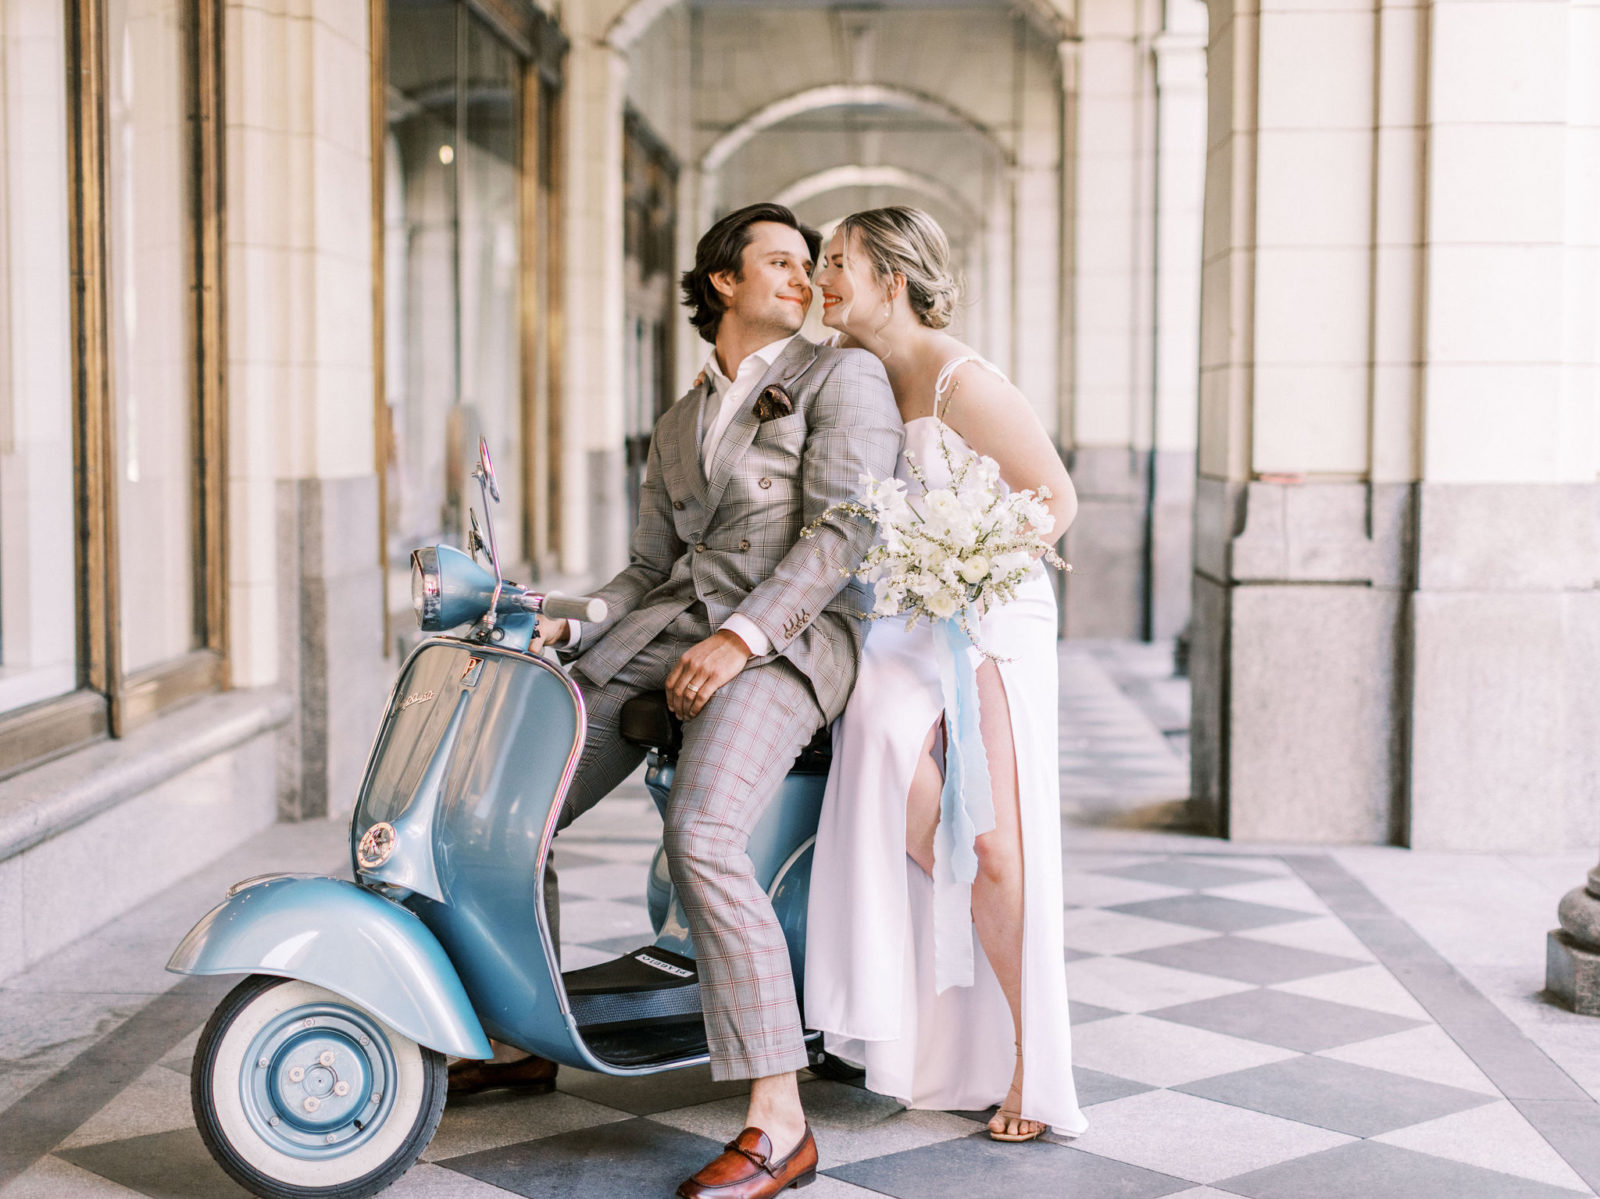 Modern bride in white slip dress and groom in a grey suit pose with a blue vespa for a downtown elopement